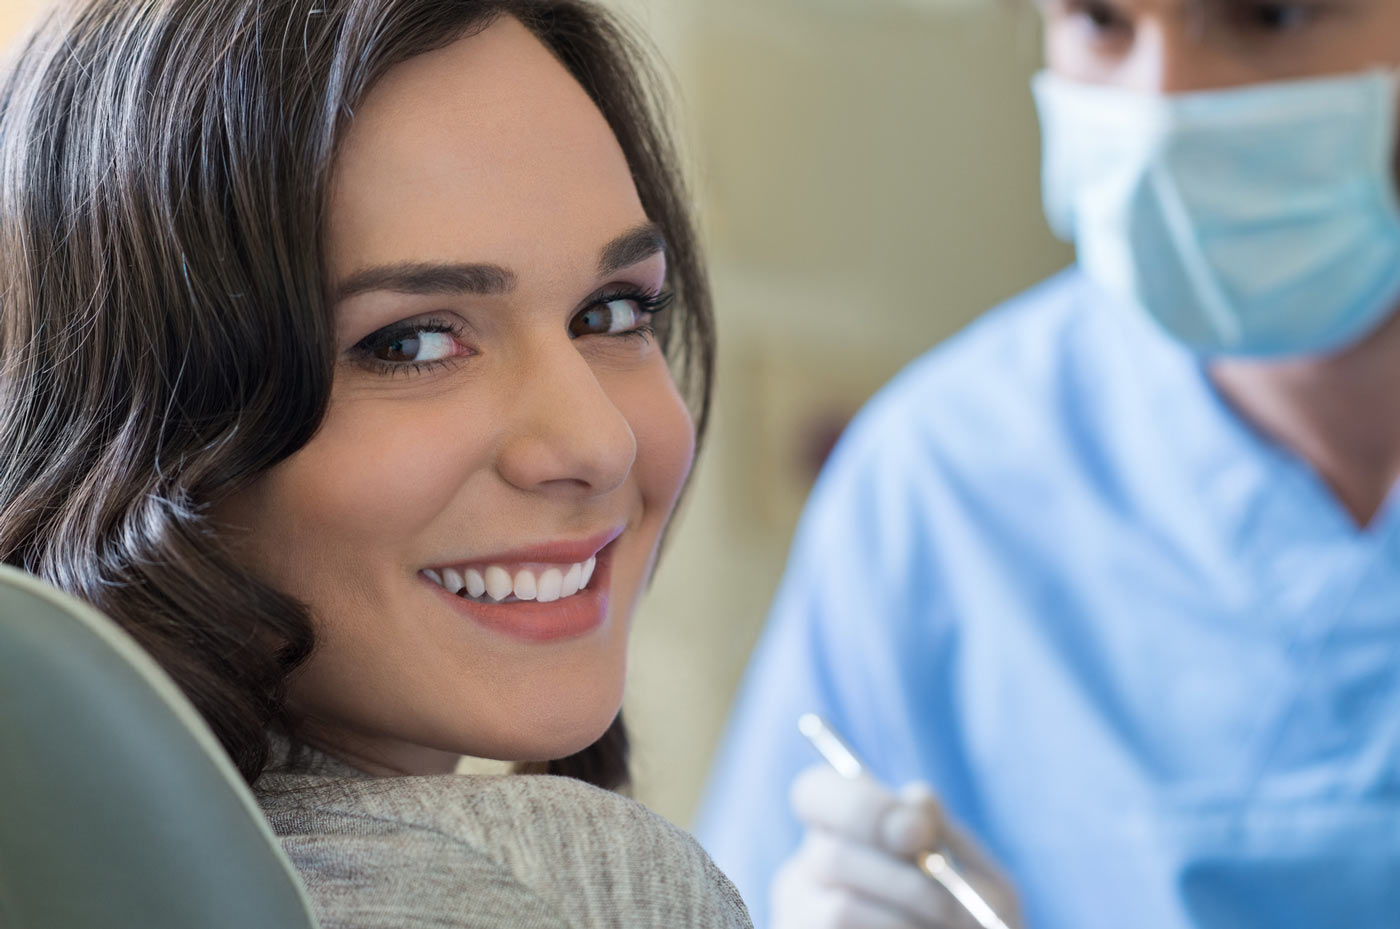 Teeth Cleaning Will Help Your Smile Sparkle